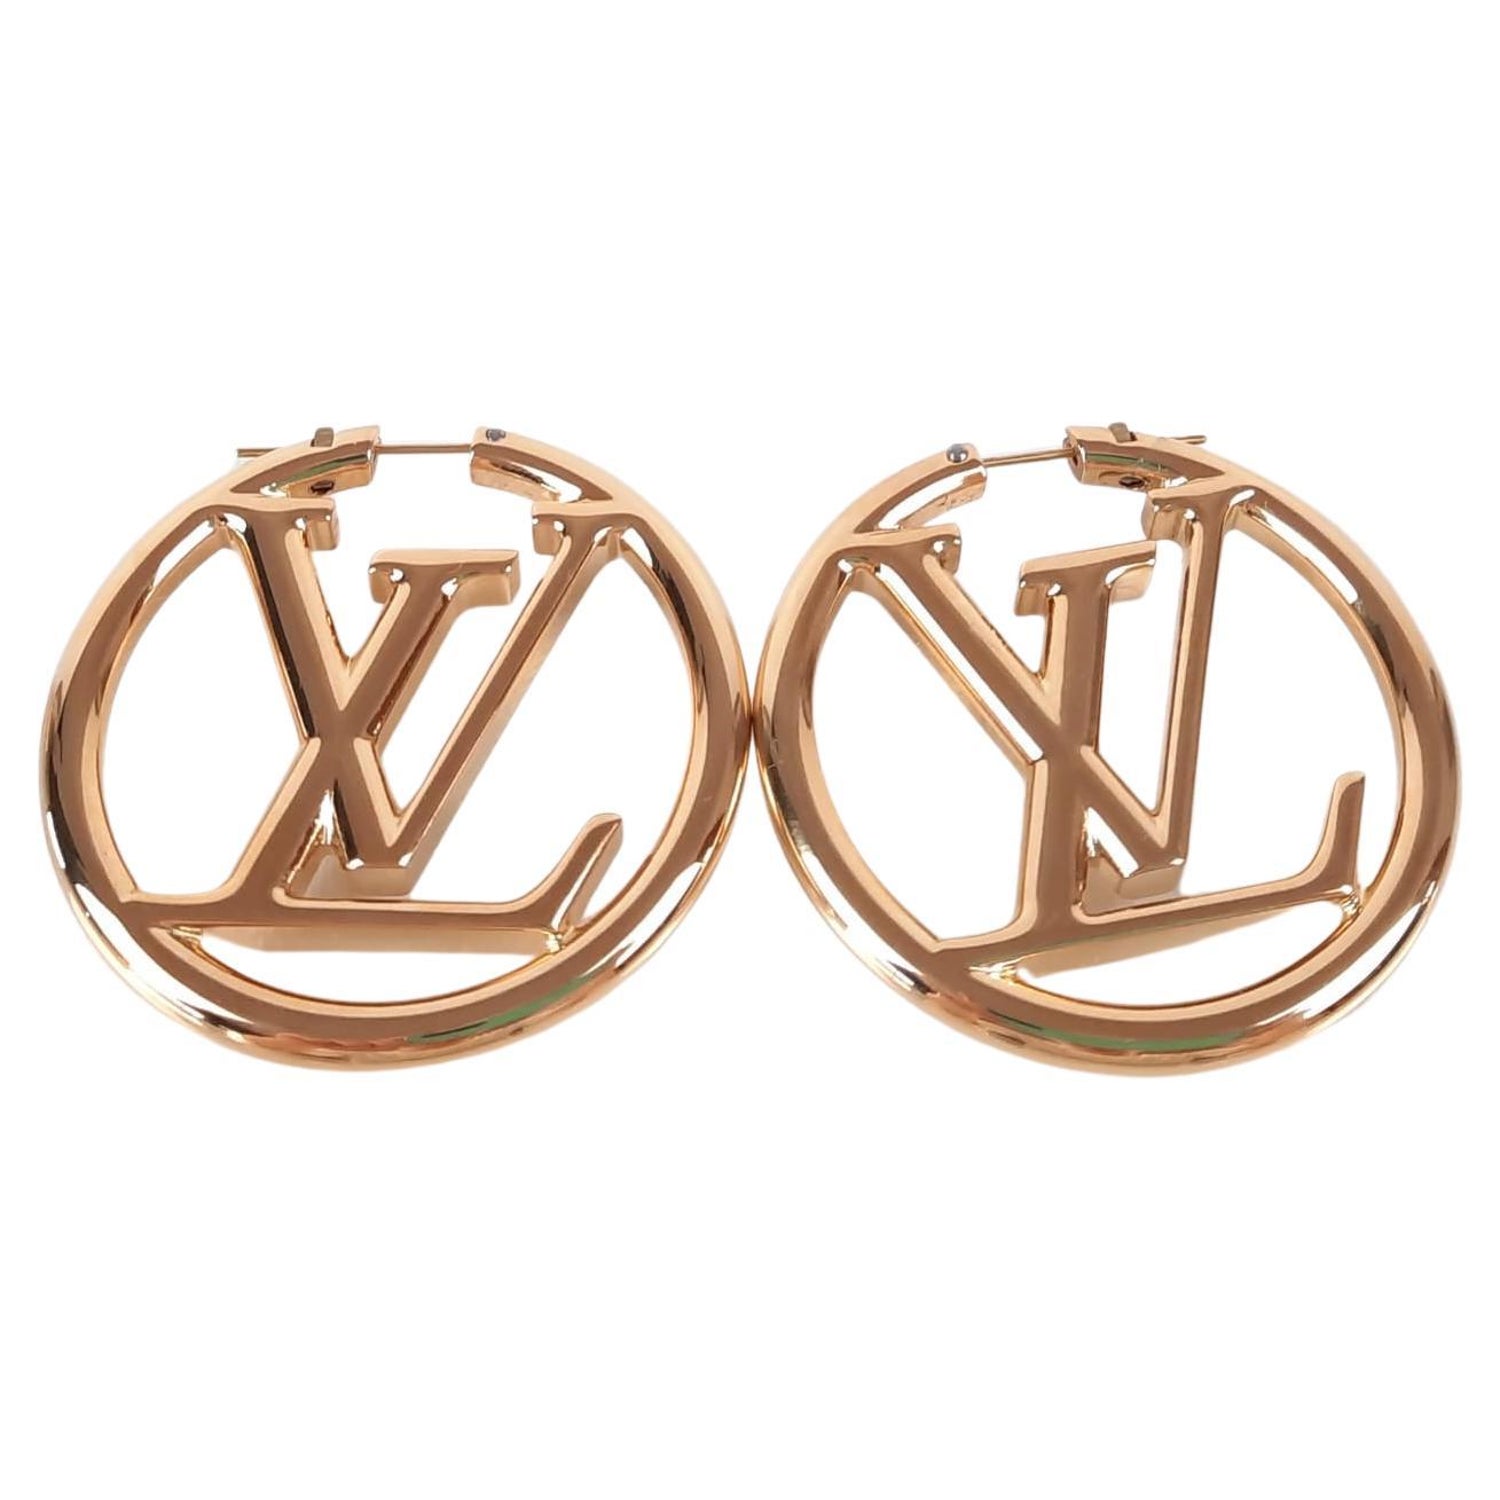 LOUIS VUITTON LOUISE HOOP EARRINGS  FIND & READ AUTHENTIC CODES on JEWELRY,  KEY HOLDERS & CHARMS 